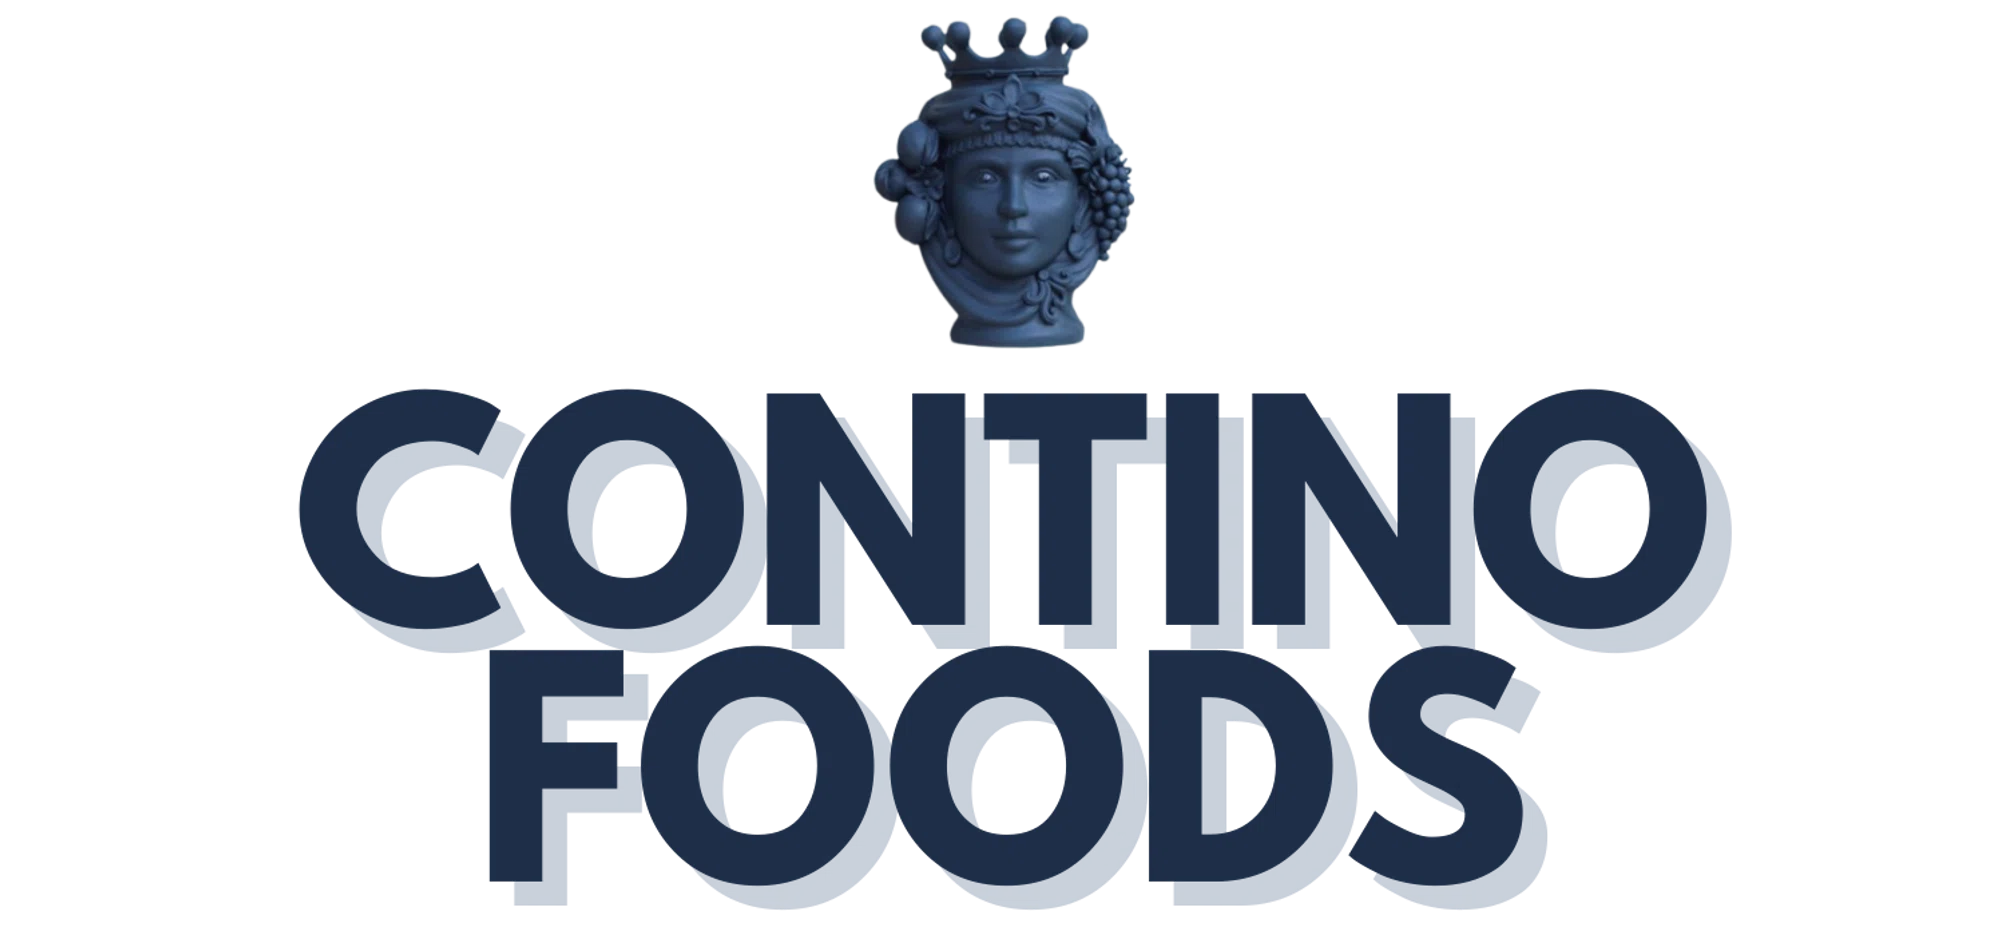 Contino Foods